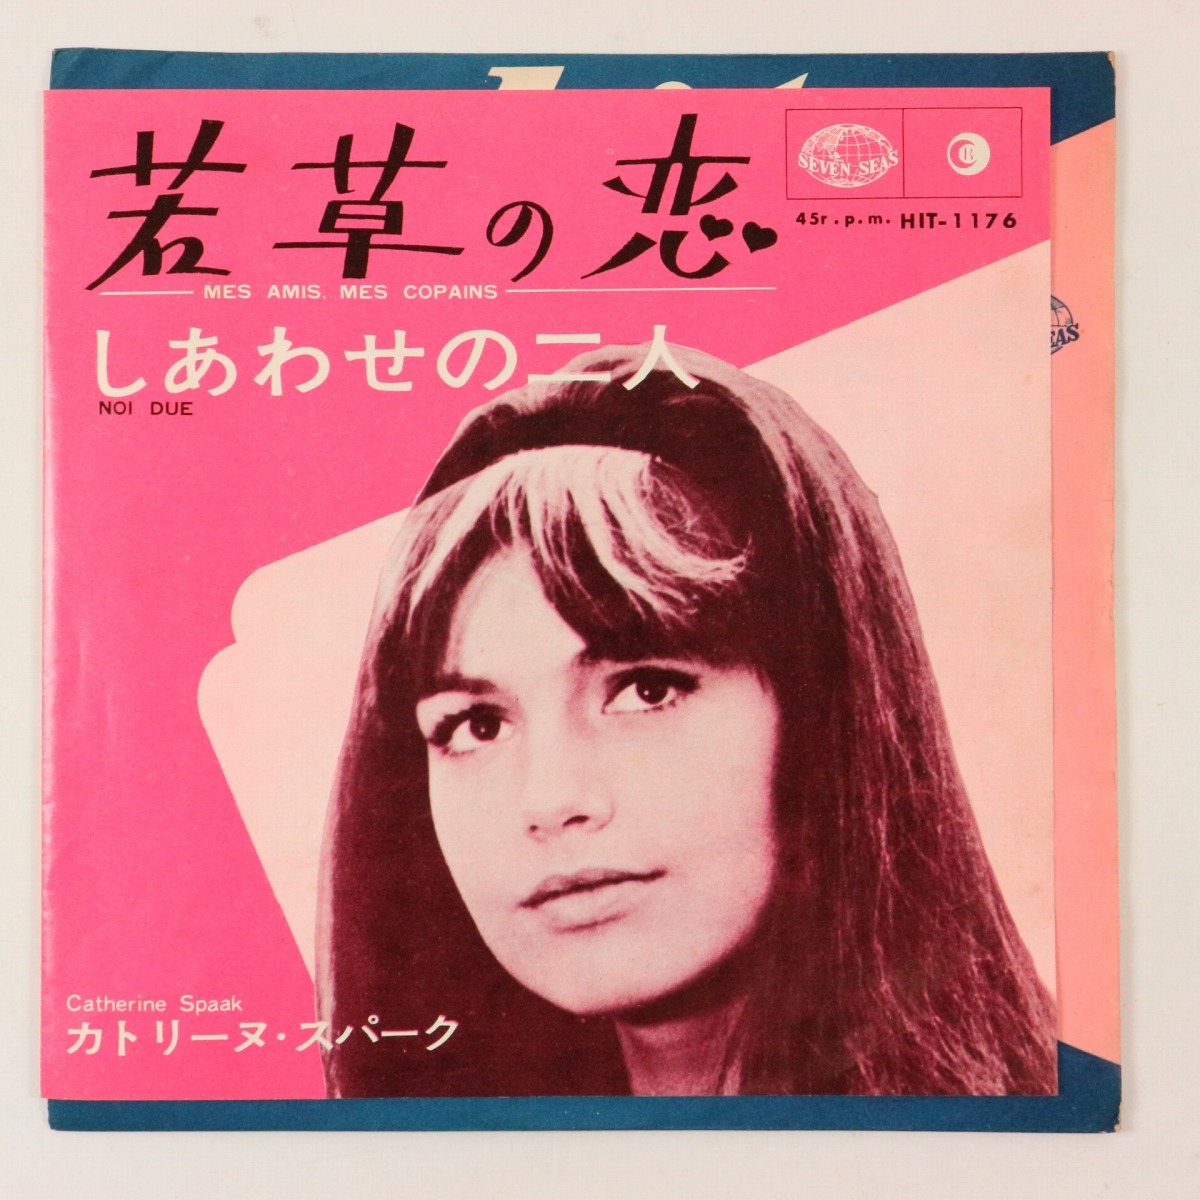 ◆EP◆CATHERINE SPAAK/カトリーヌ・スパーク◆若草の恋/しあわせの二人◆Seven Seas HIT-1176◆Mes Amis, Mes Copains/Noi Due_画像1